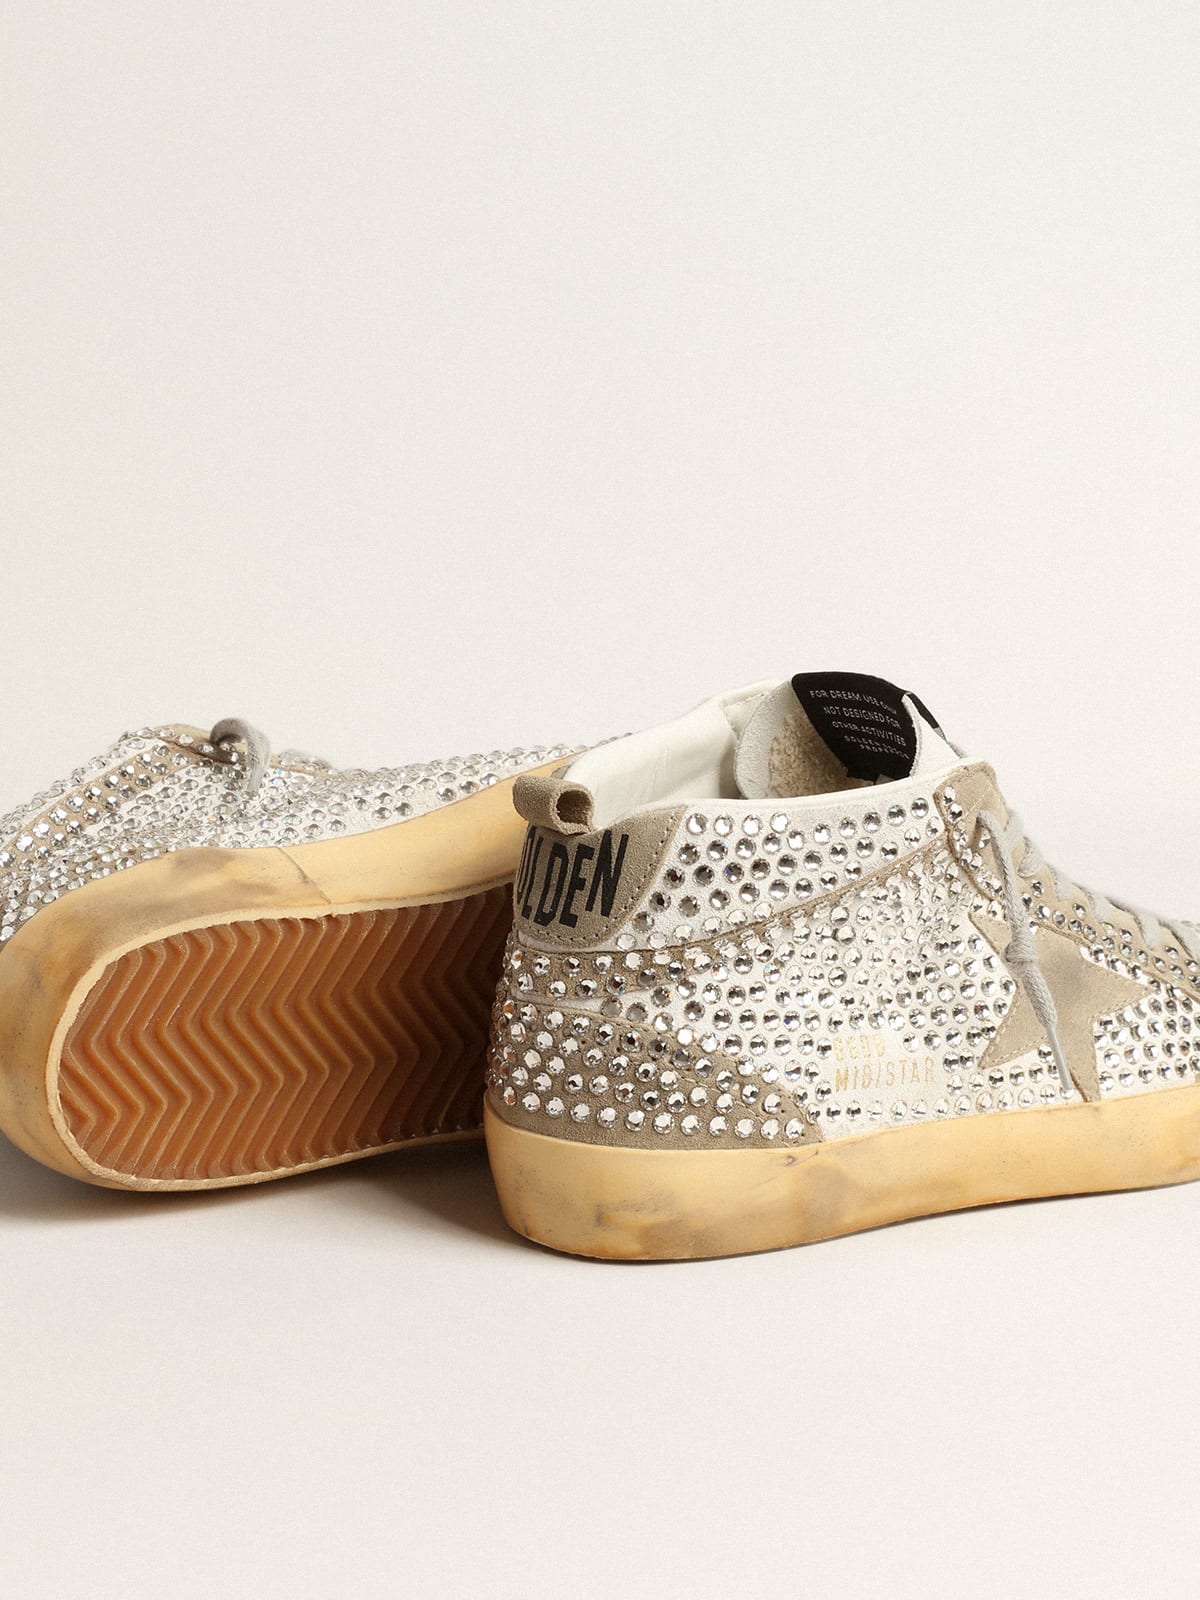 Golden Goose - Mid Star LTD in white and dove-gray suede with Swarovski crystals in 